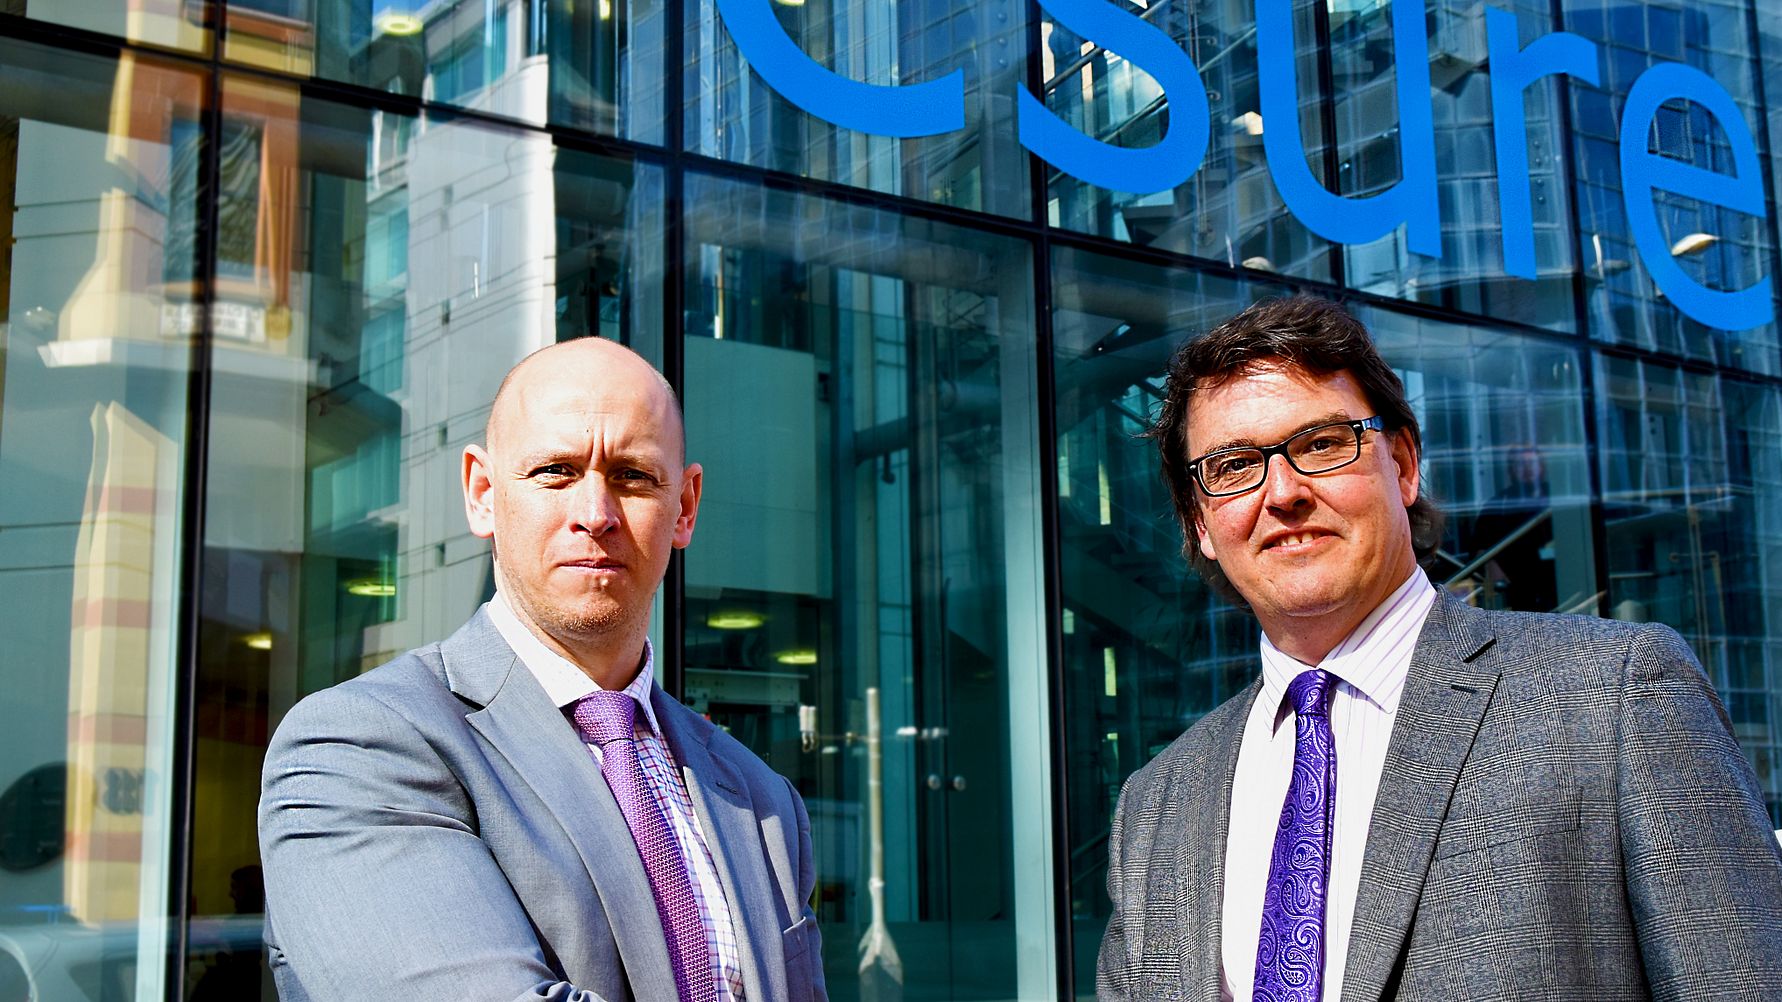 esure appoints the RAC to provide insurance customers with